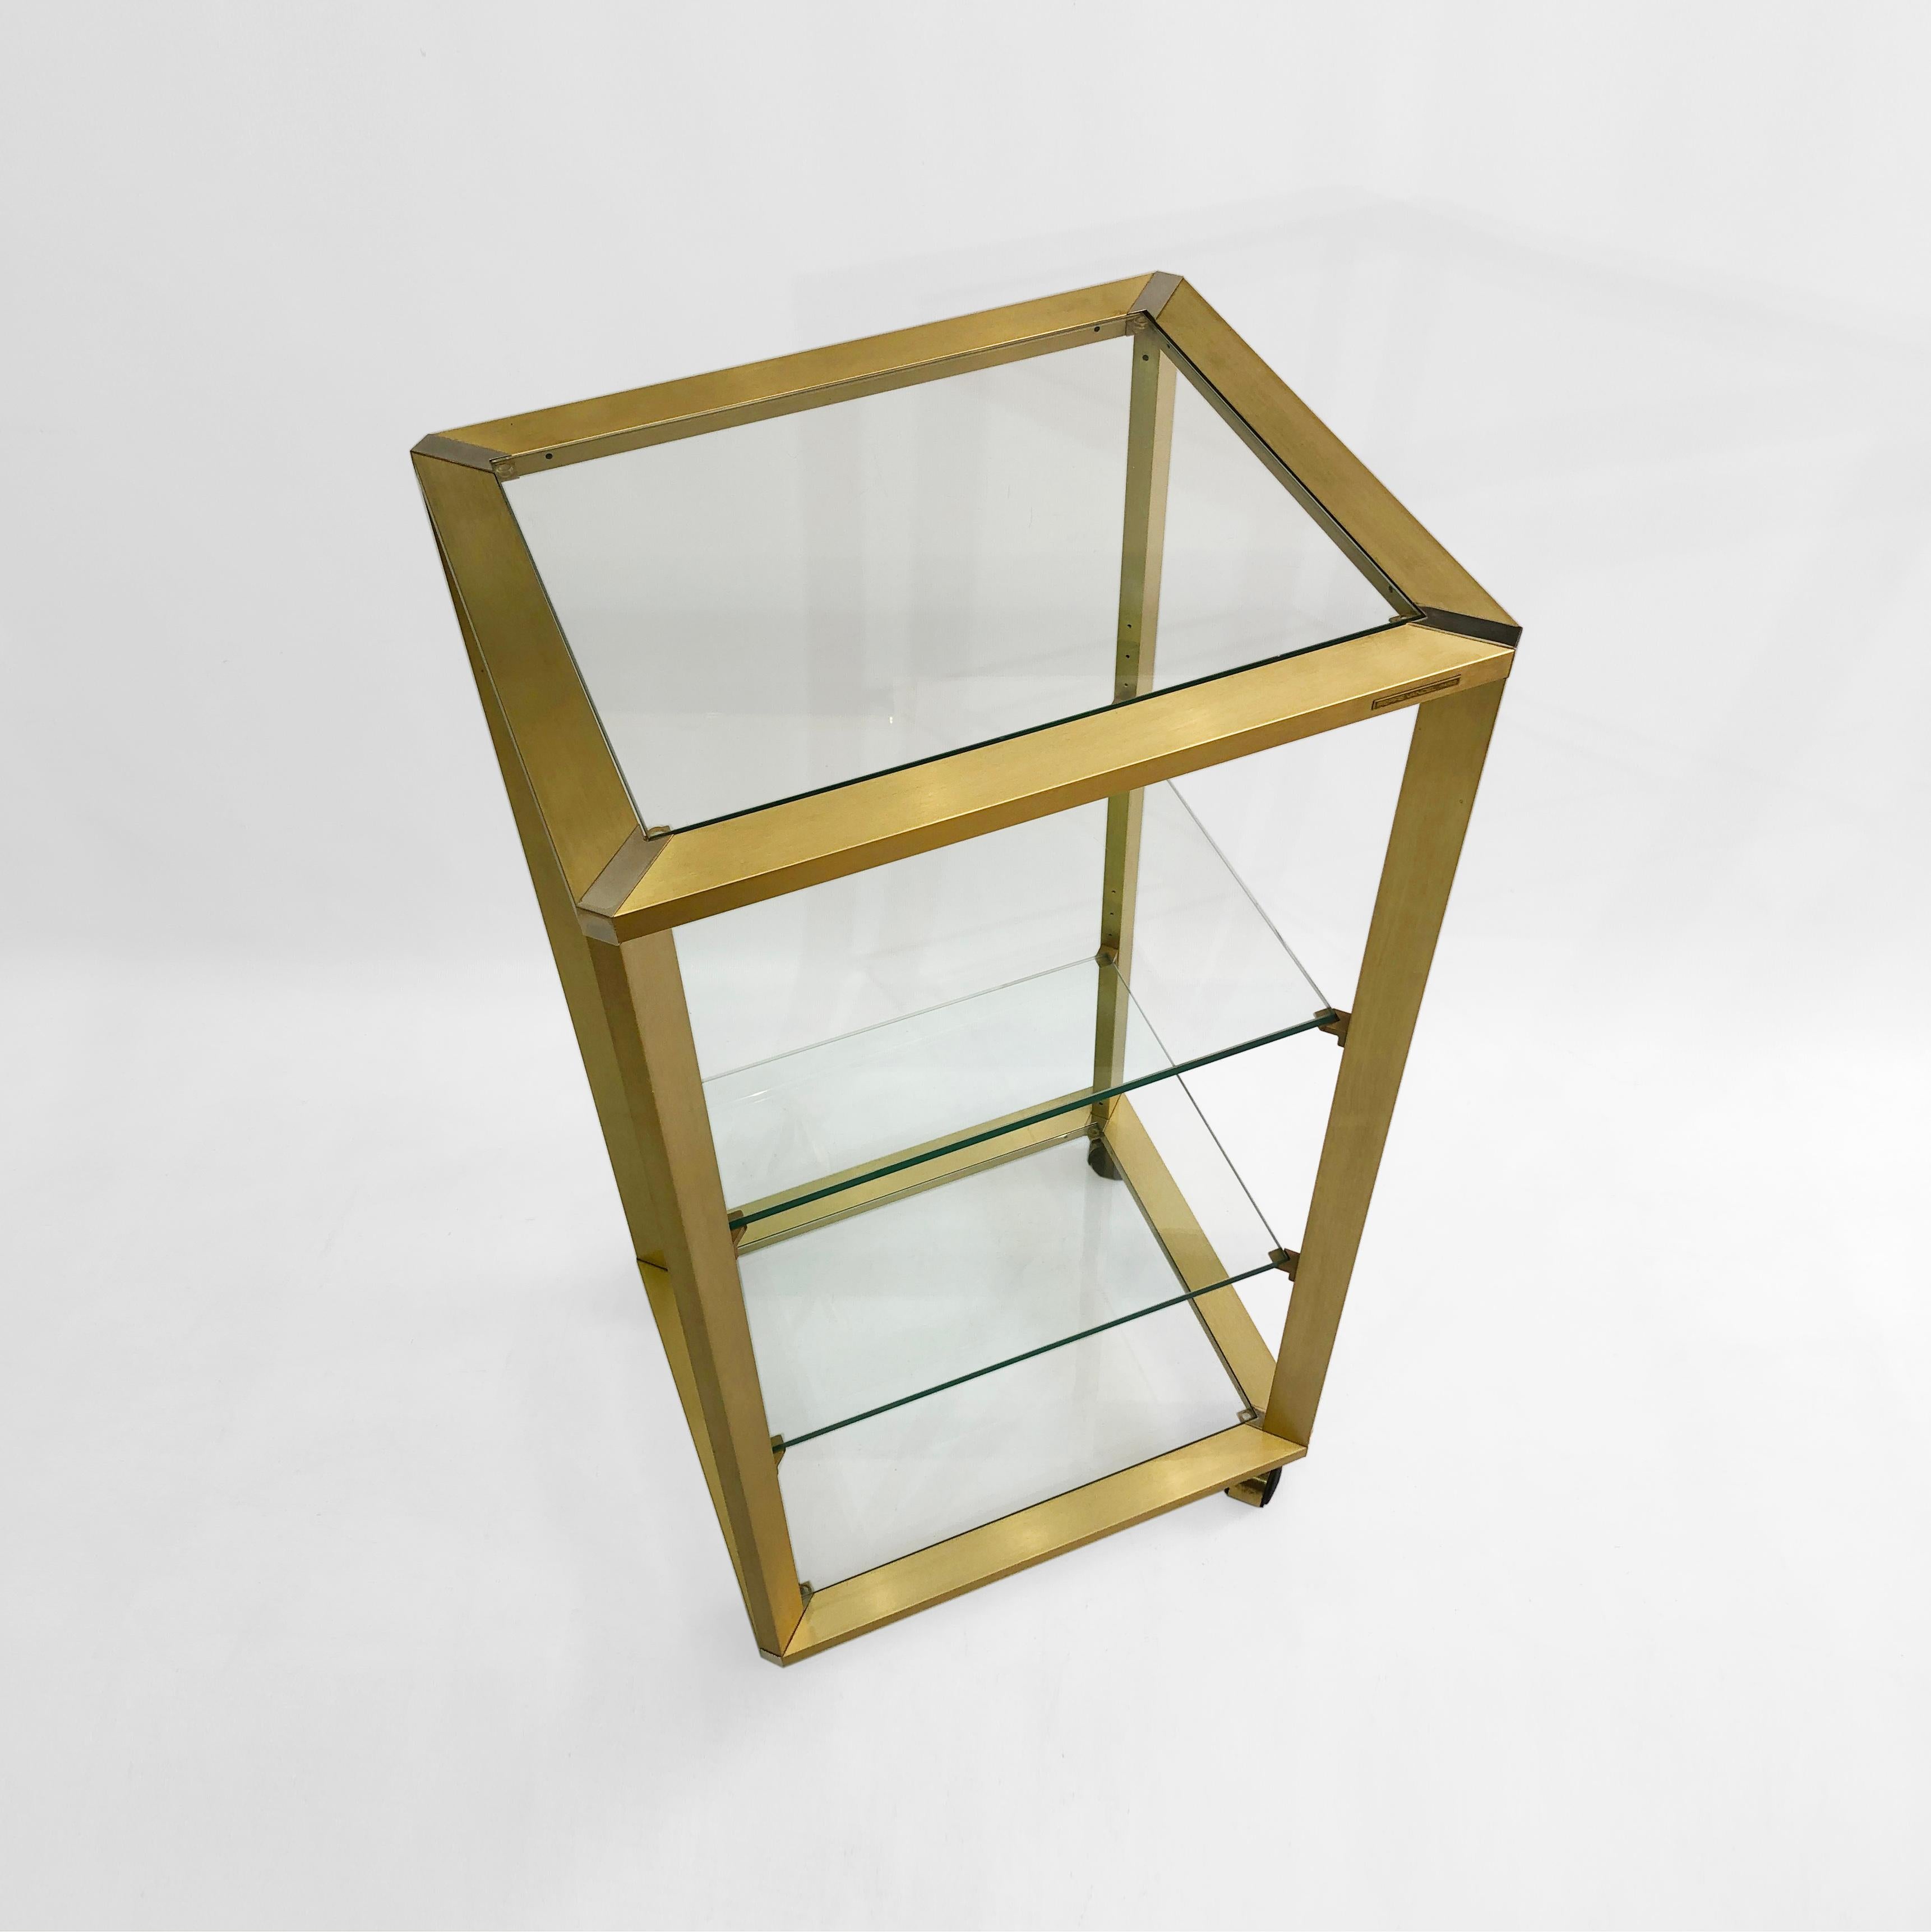 Pierre Vandel Gold Brass Glass Etagere on Wheels 1970s Drinks Trolley Shelving In Good Condition For Sale In London, GB